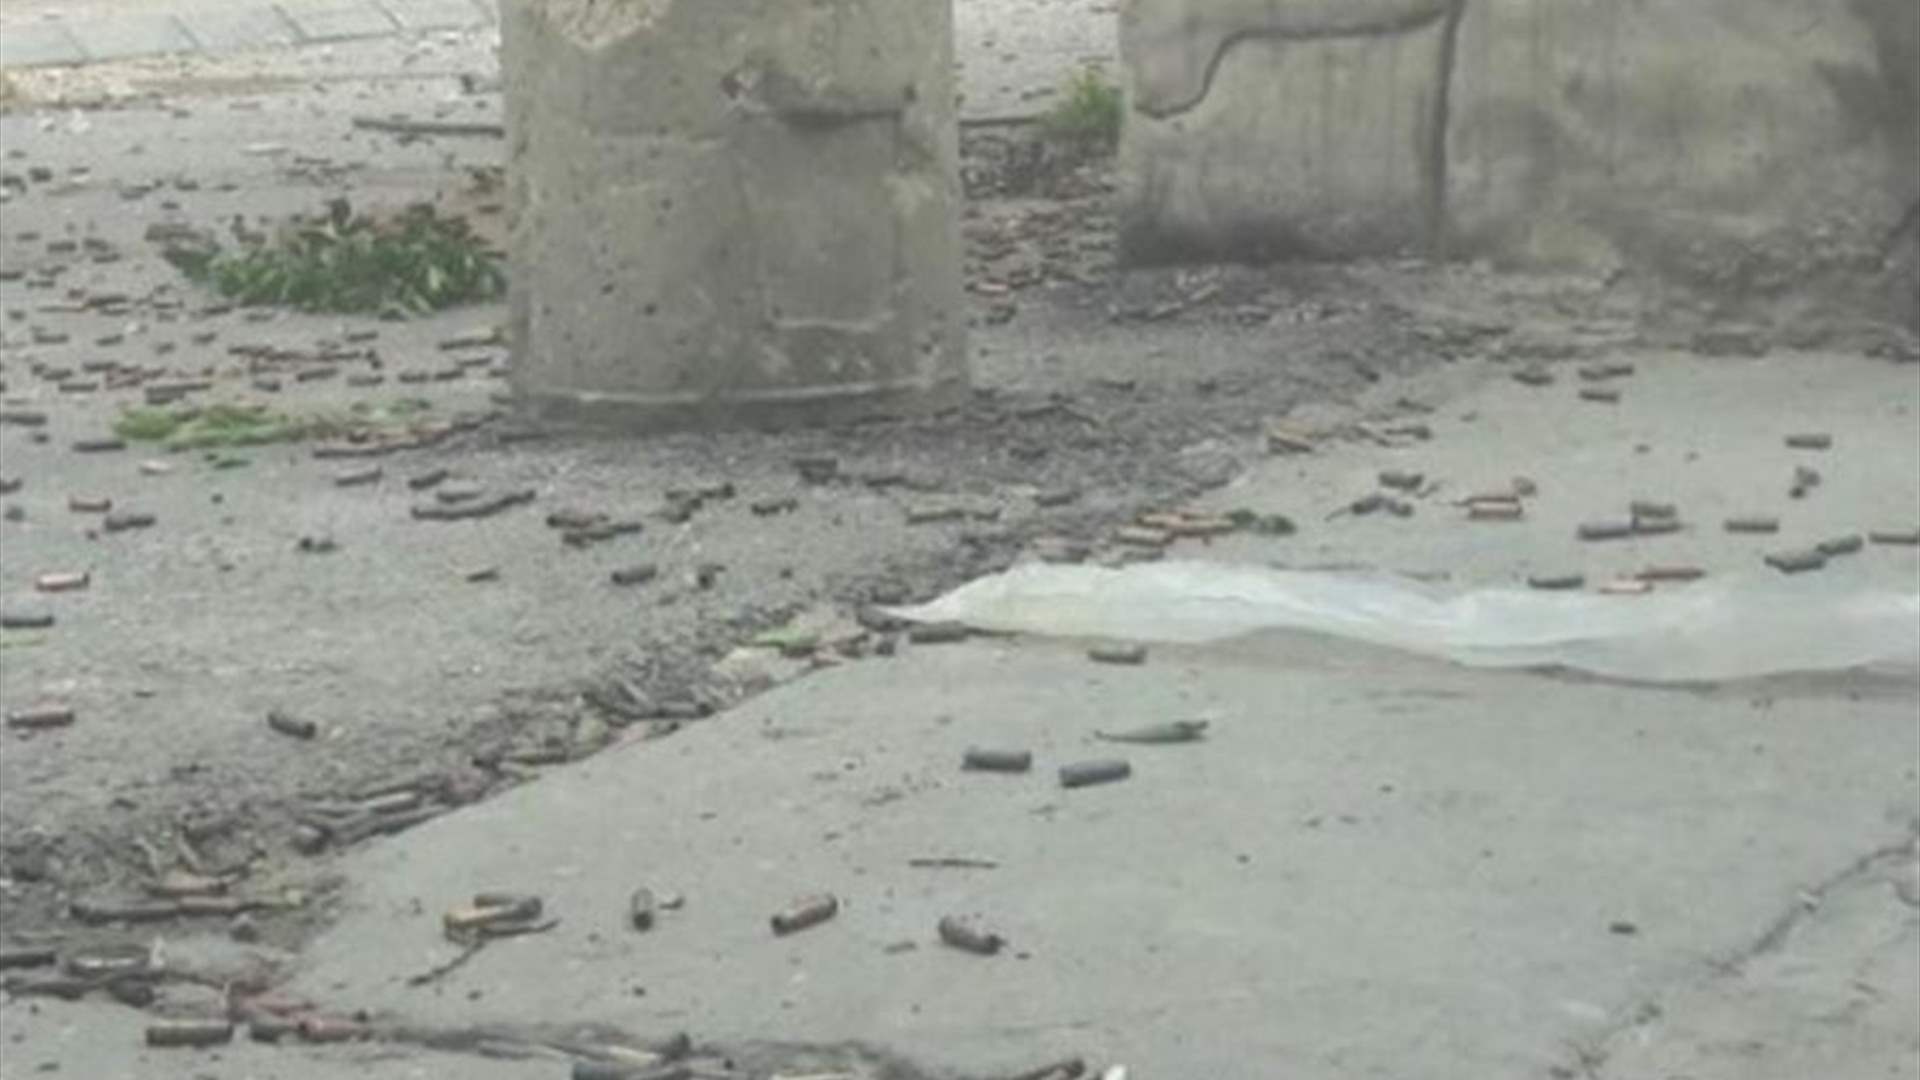 Stray bullets hit shops and homes in Sidon